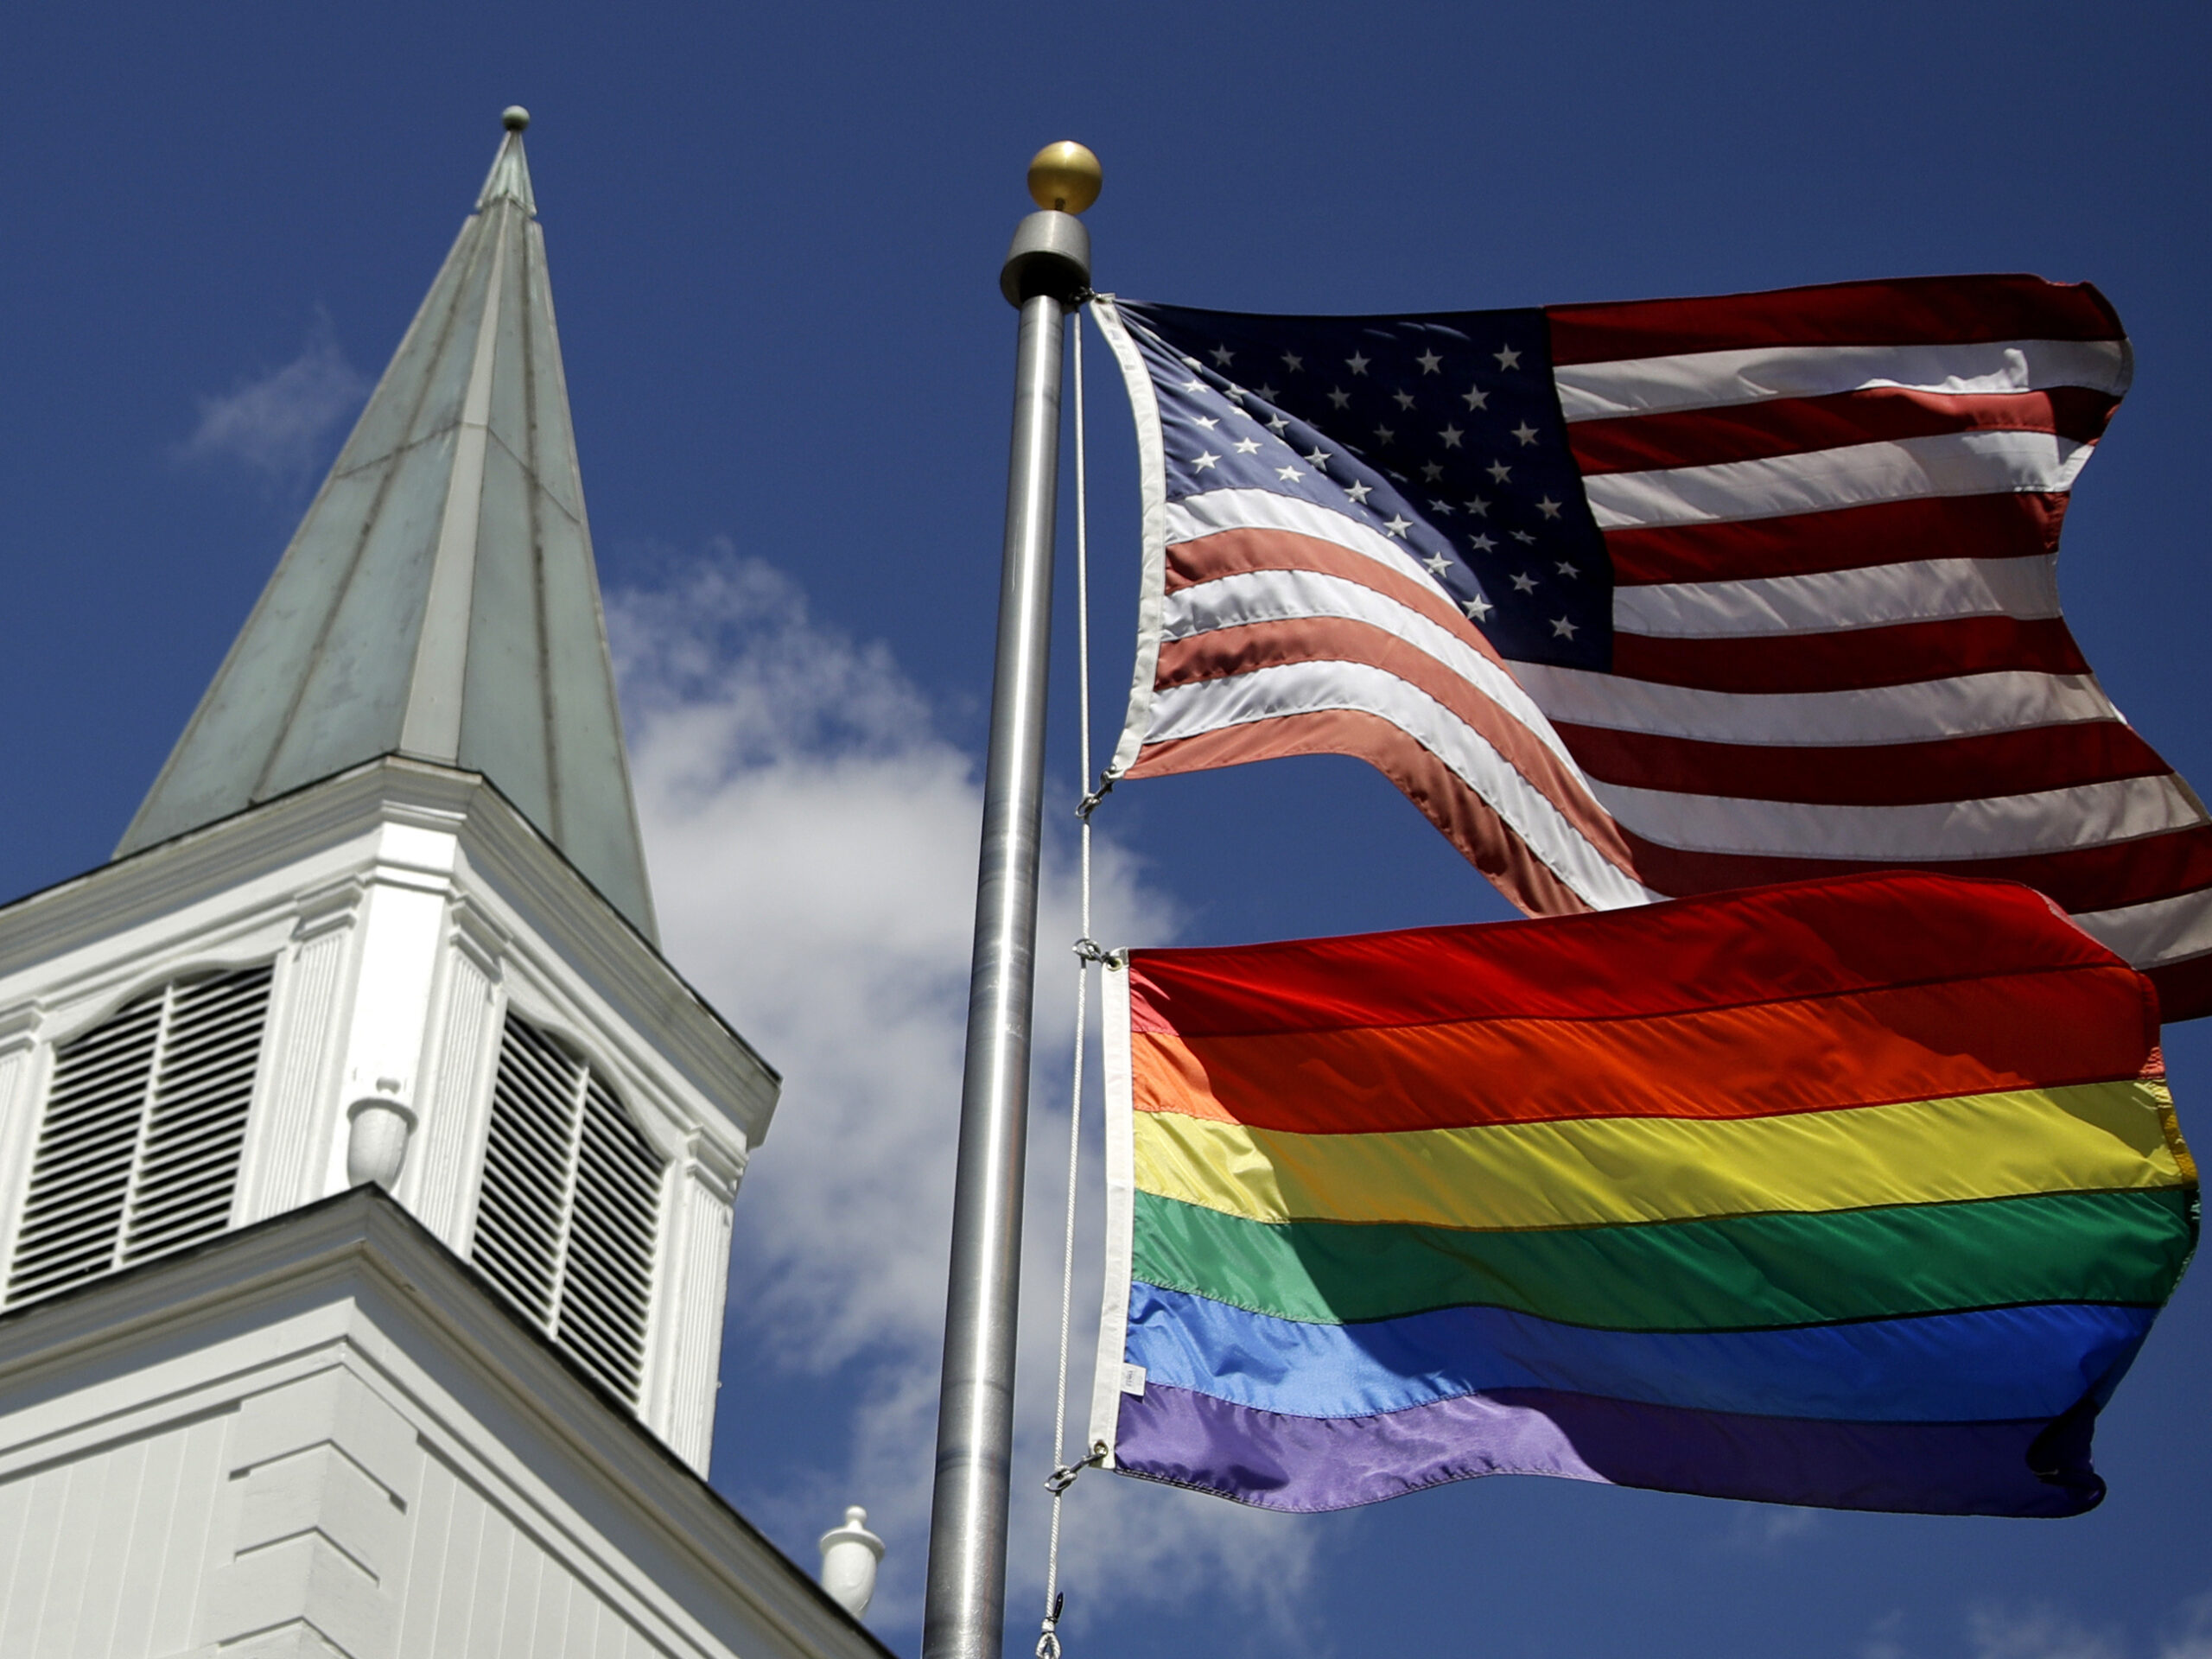 A quarter of U.S. congregations in the United Methodist Church have left the denomination as of December due to disagreements over whether to ordain LGBTQ clergy and perform same-sex weddings.